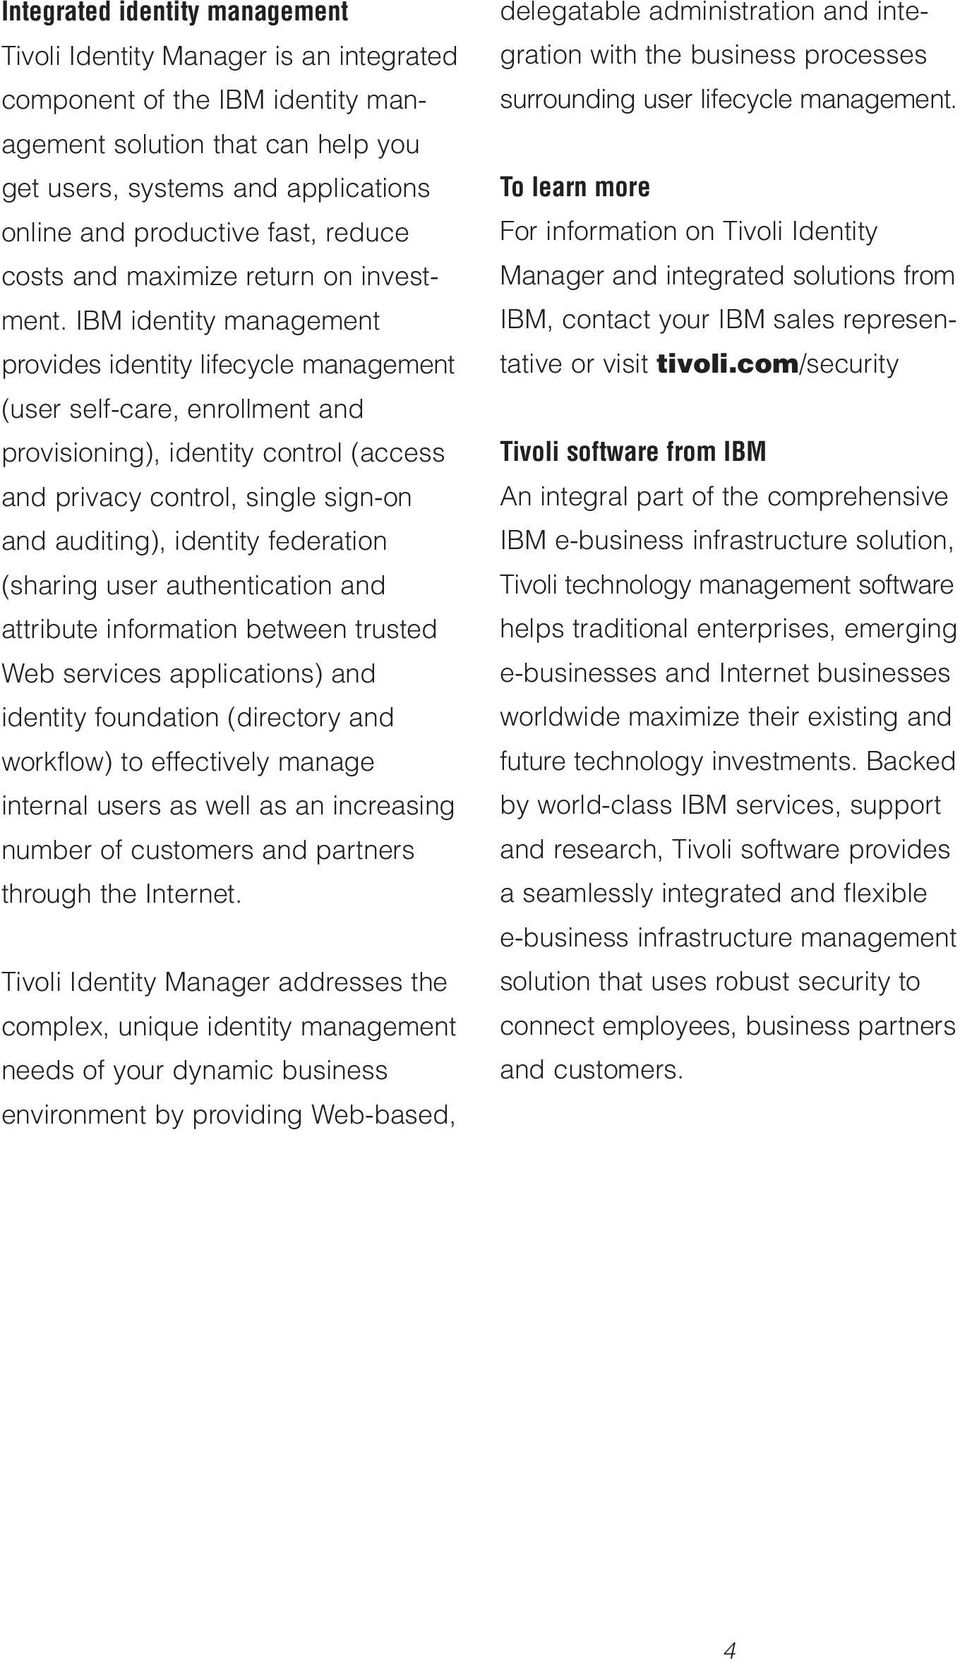 IBM identity management provides identity lifecycle management (user self-care, enrollment and provisioning), identity control (access and privacy control, single sign-on and auditing), identity